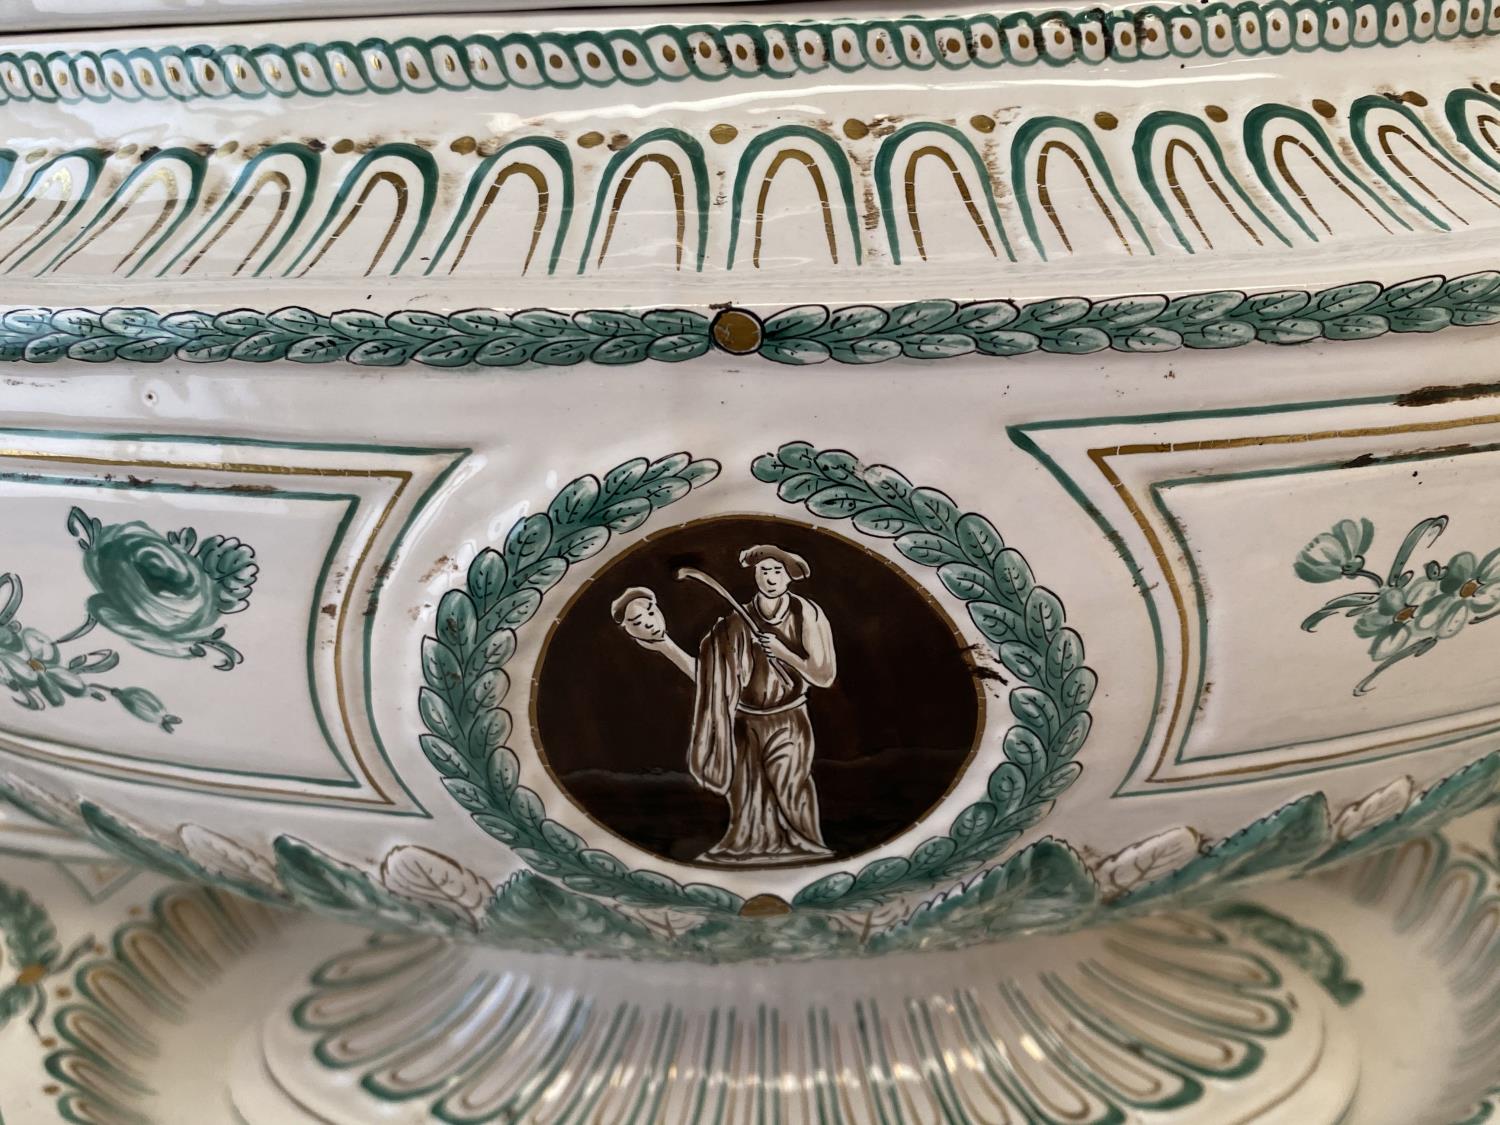 Large French early C19th French lidded tureen on a matching base by Veuve Perrin (1748-1803) - Image 3 of 8